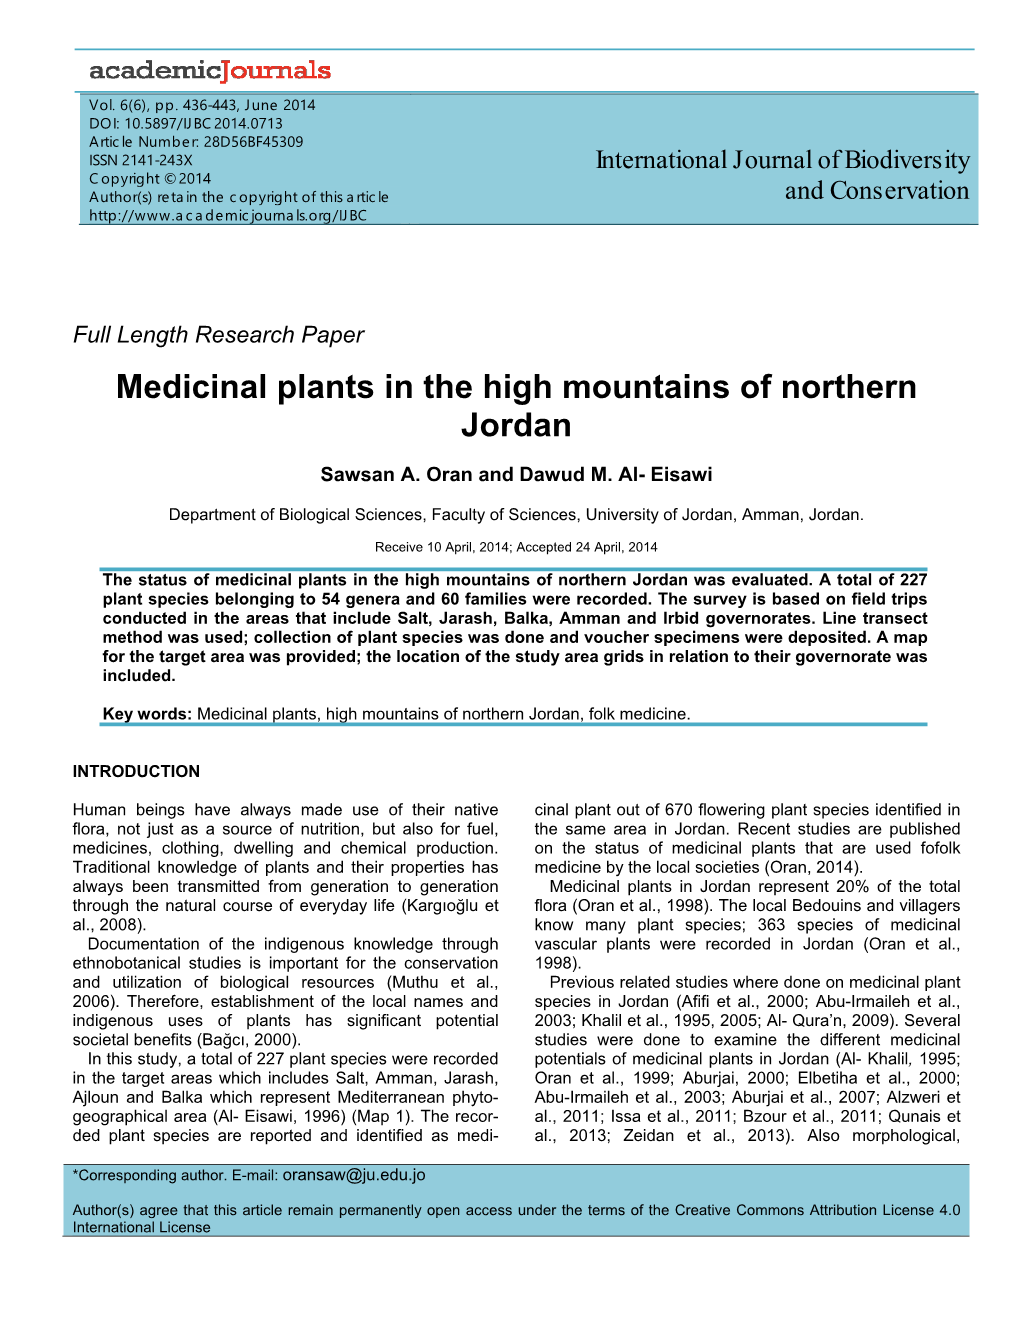 Medicinal Plants in the High Mountains of Northern Jordan